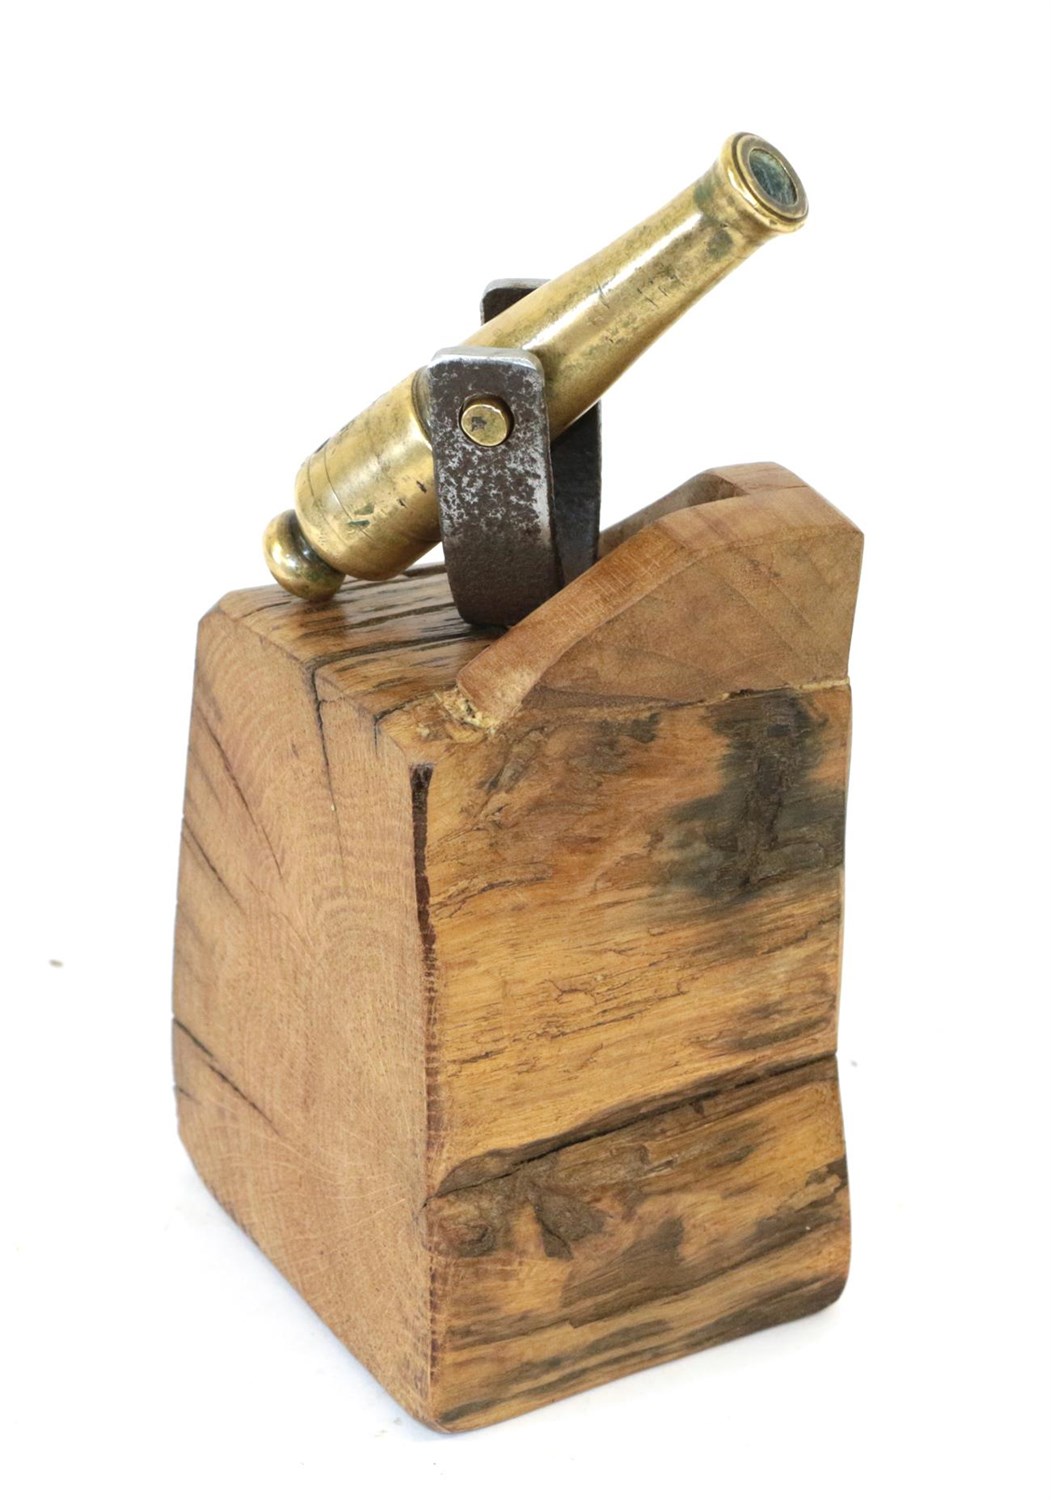 Lot 48 - A Small Brass Desk Cannon, the 11cm barrel stamped with broad arrow/V R and mounted on an oak...